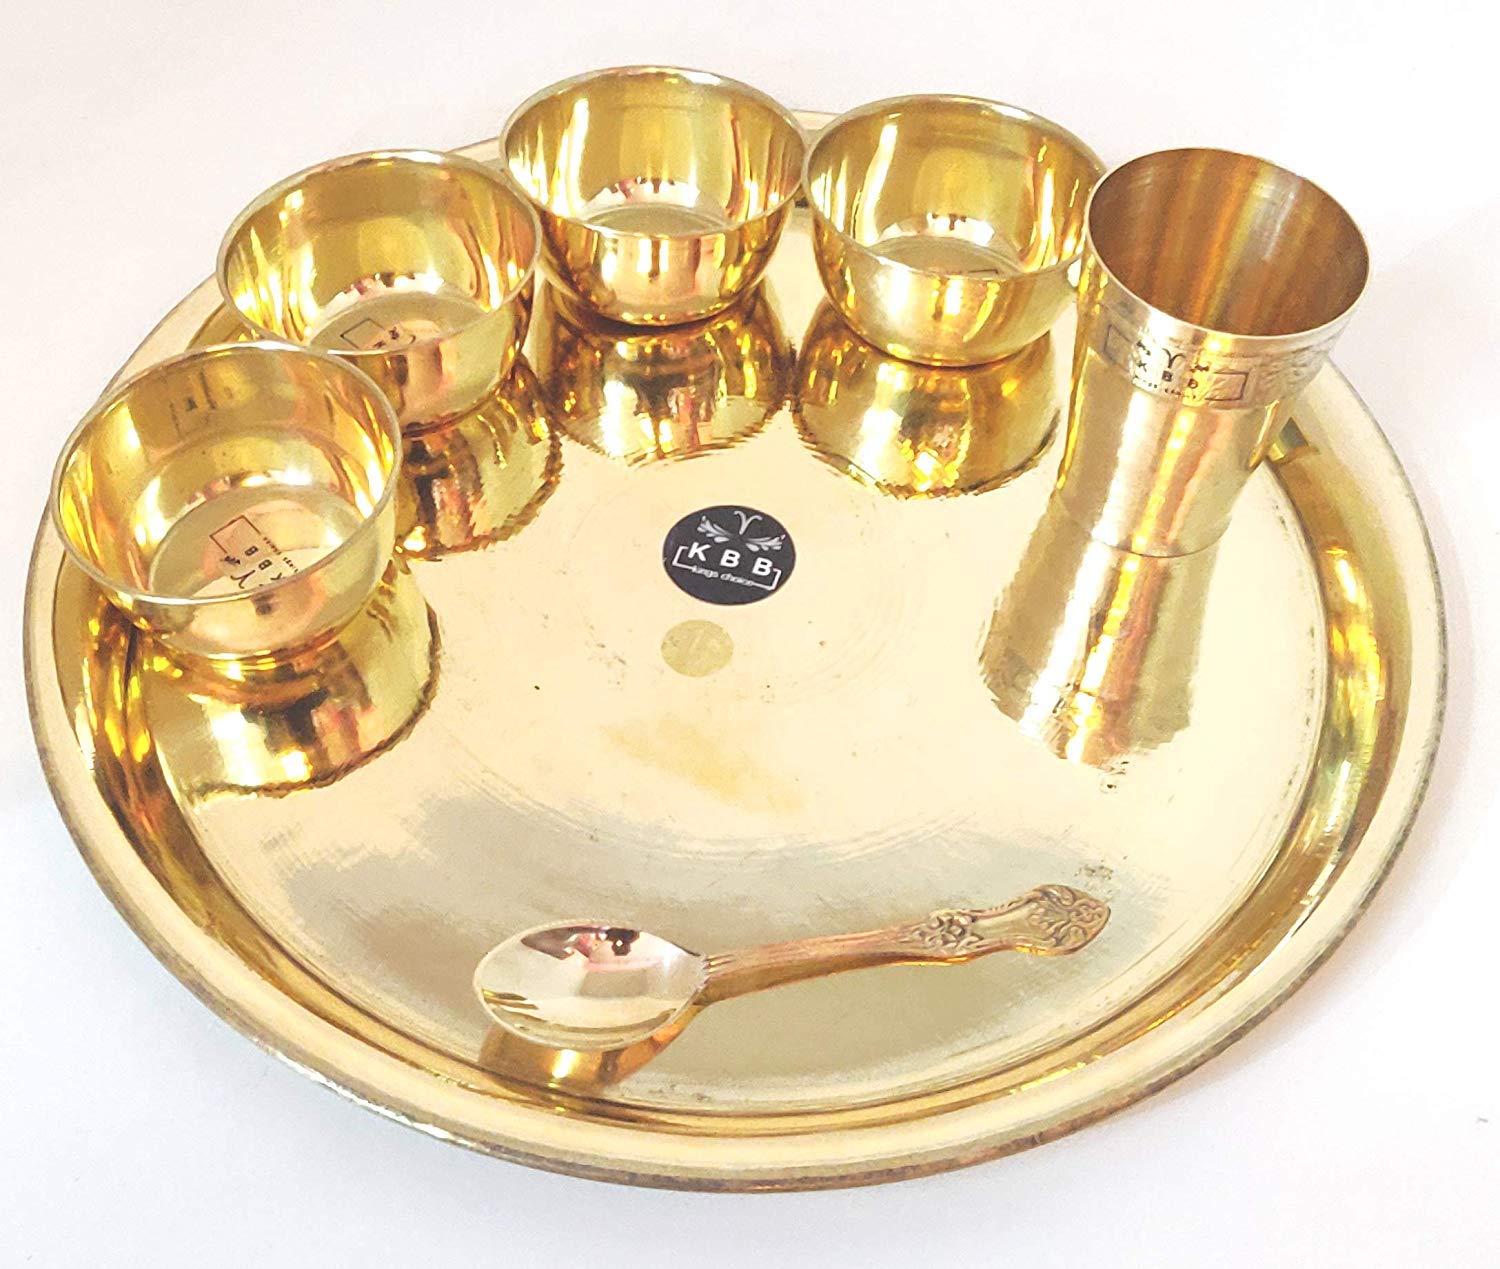 https://store.wholesometales.com/wp-content/uploads/2020/10/Pure-Brass-Thali-Dinner-Set-14-Inch-Set-of-7-Pieces-by-KBB.jpg